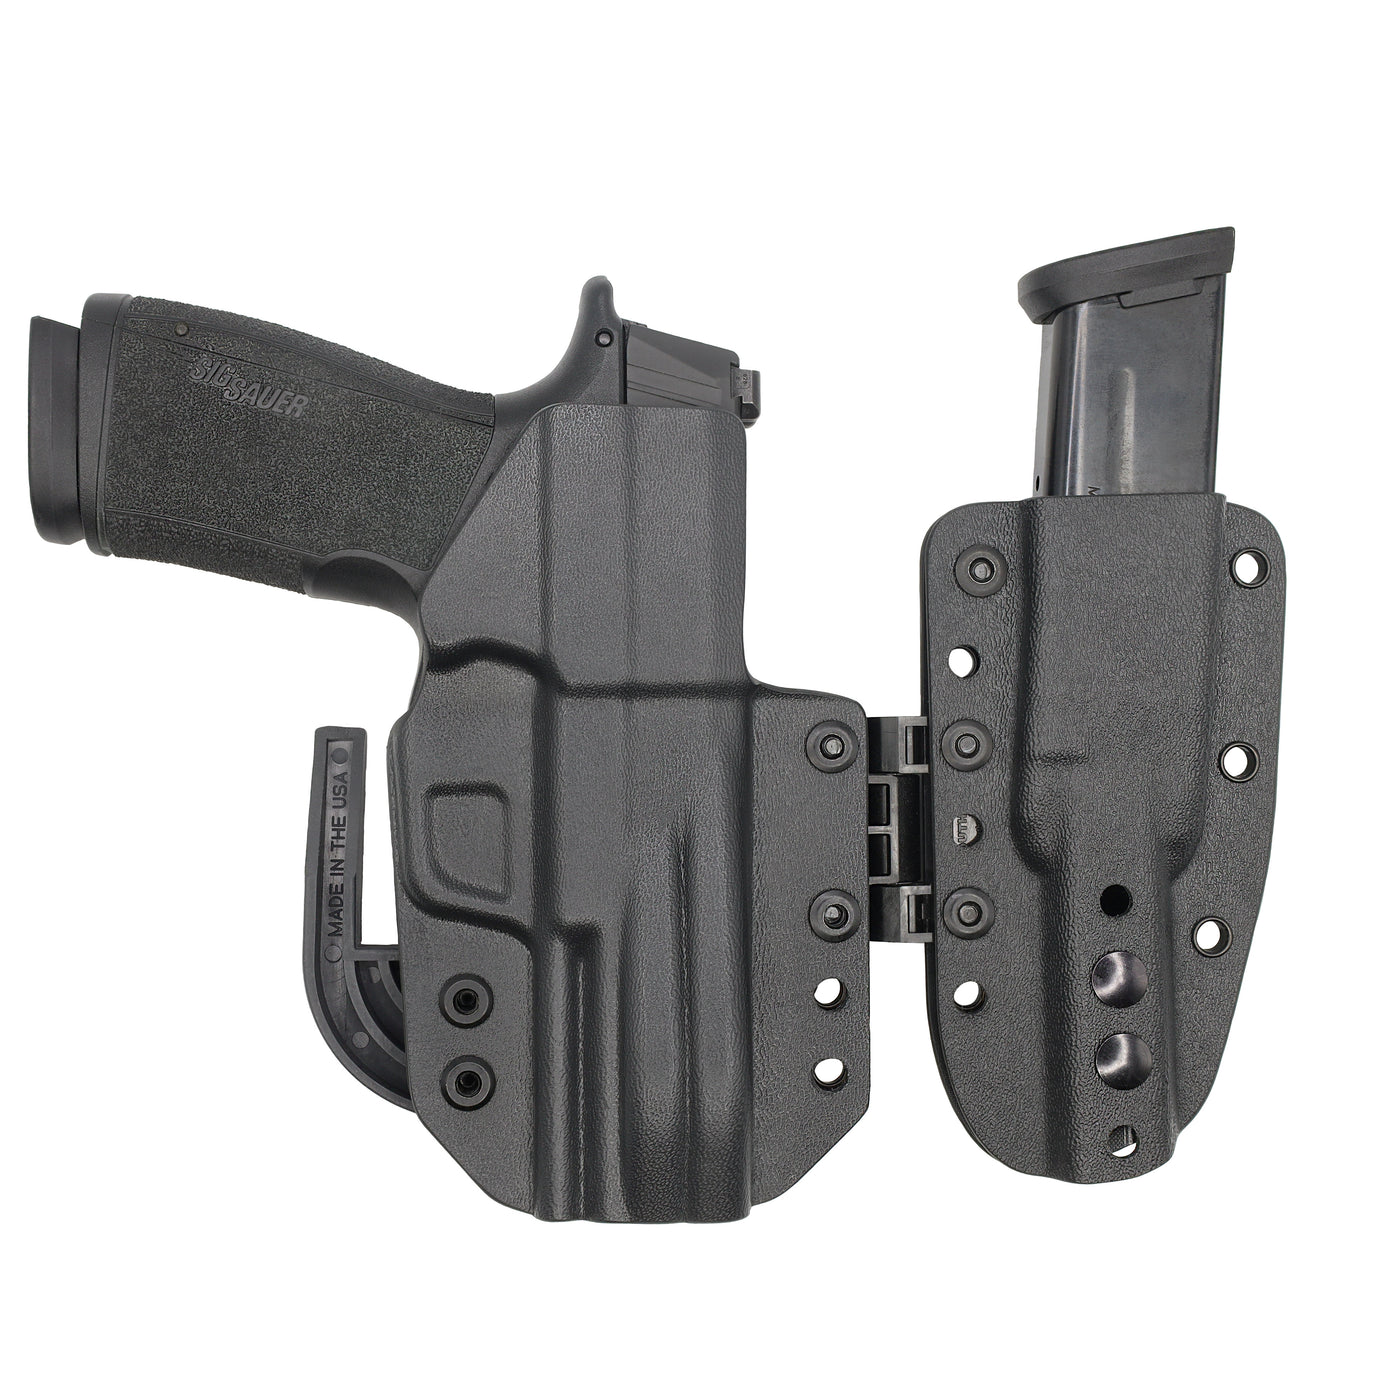 C&G Holsters custom MOD1 P365-XMACRO holstered LEFT HAND back view